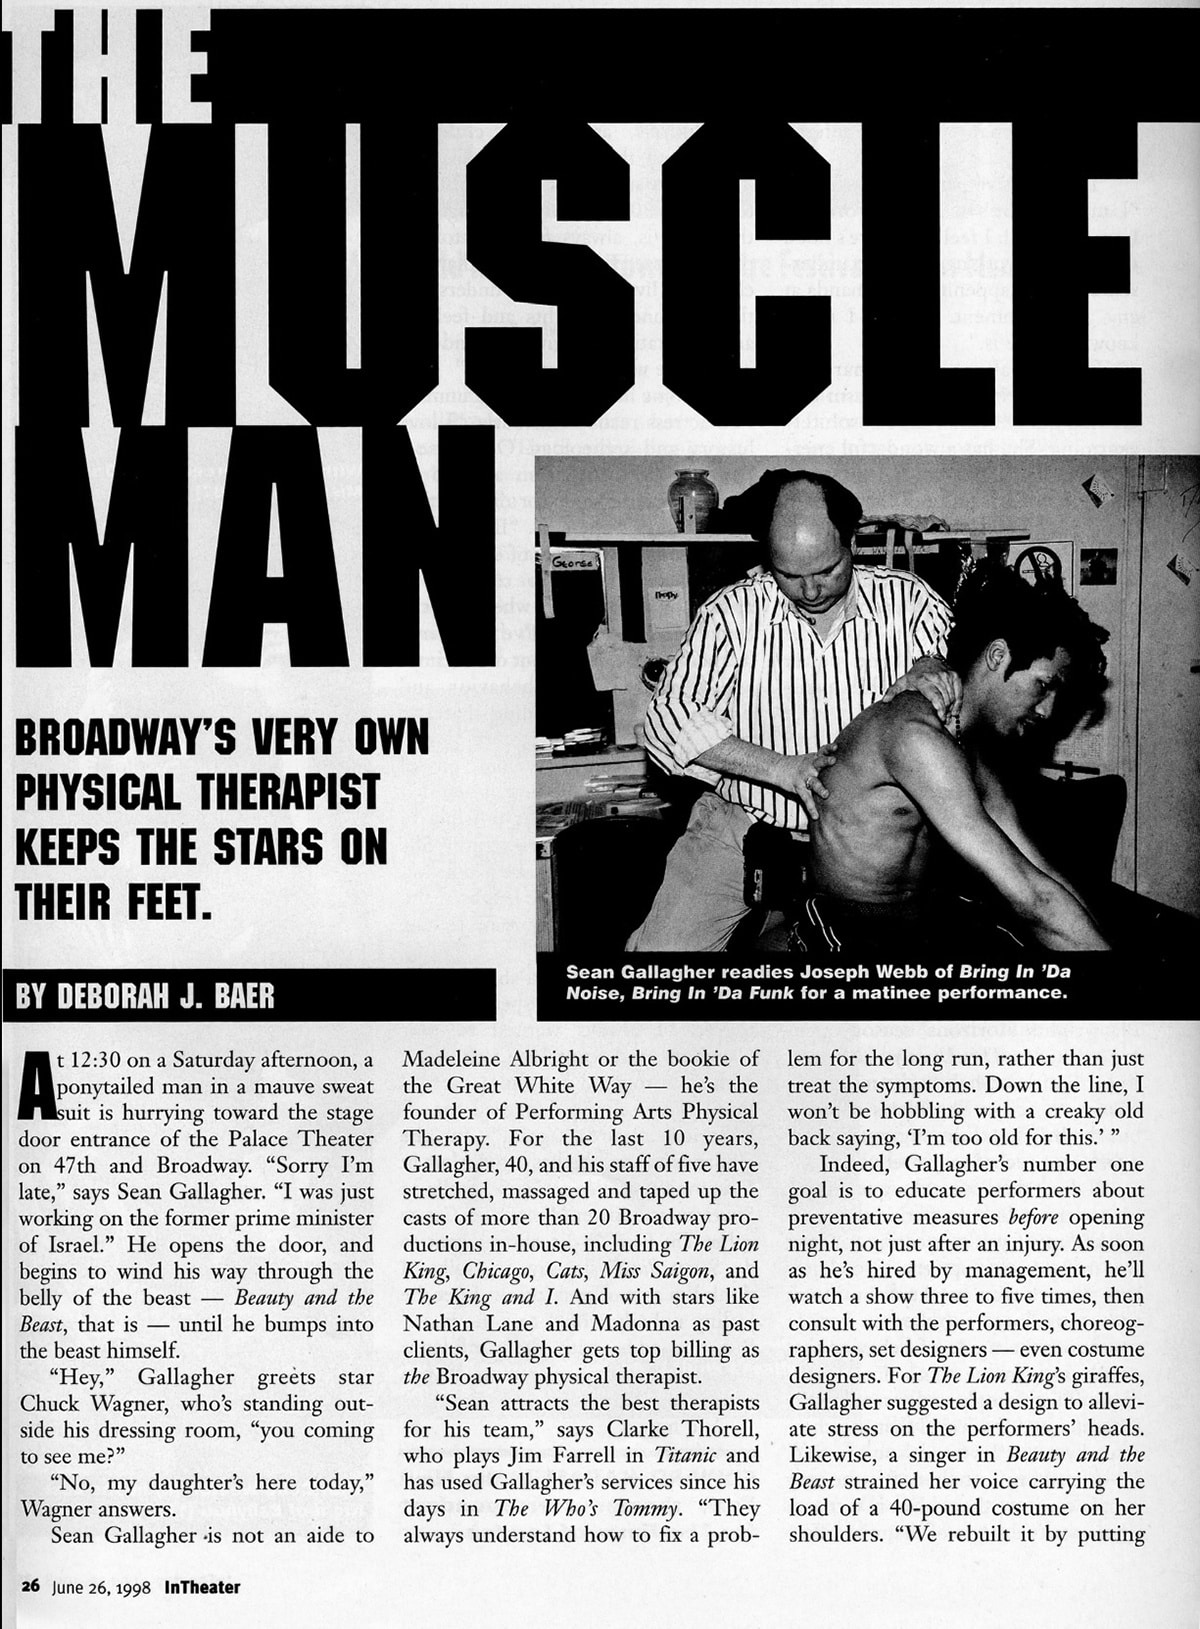 Therapists Take to NY Stage pilates archive article